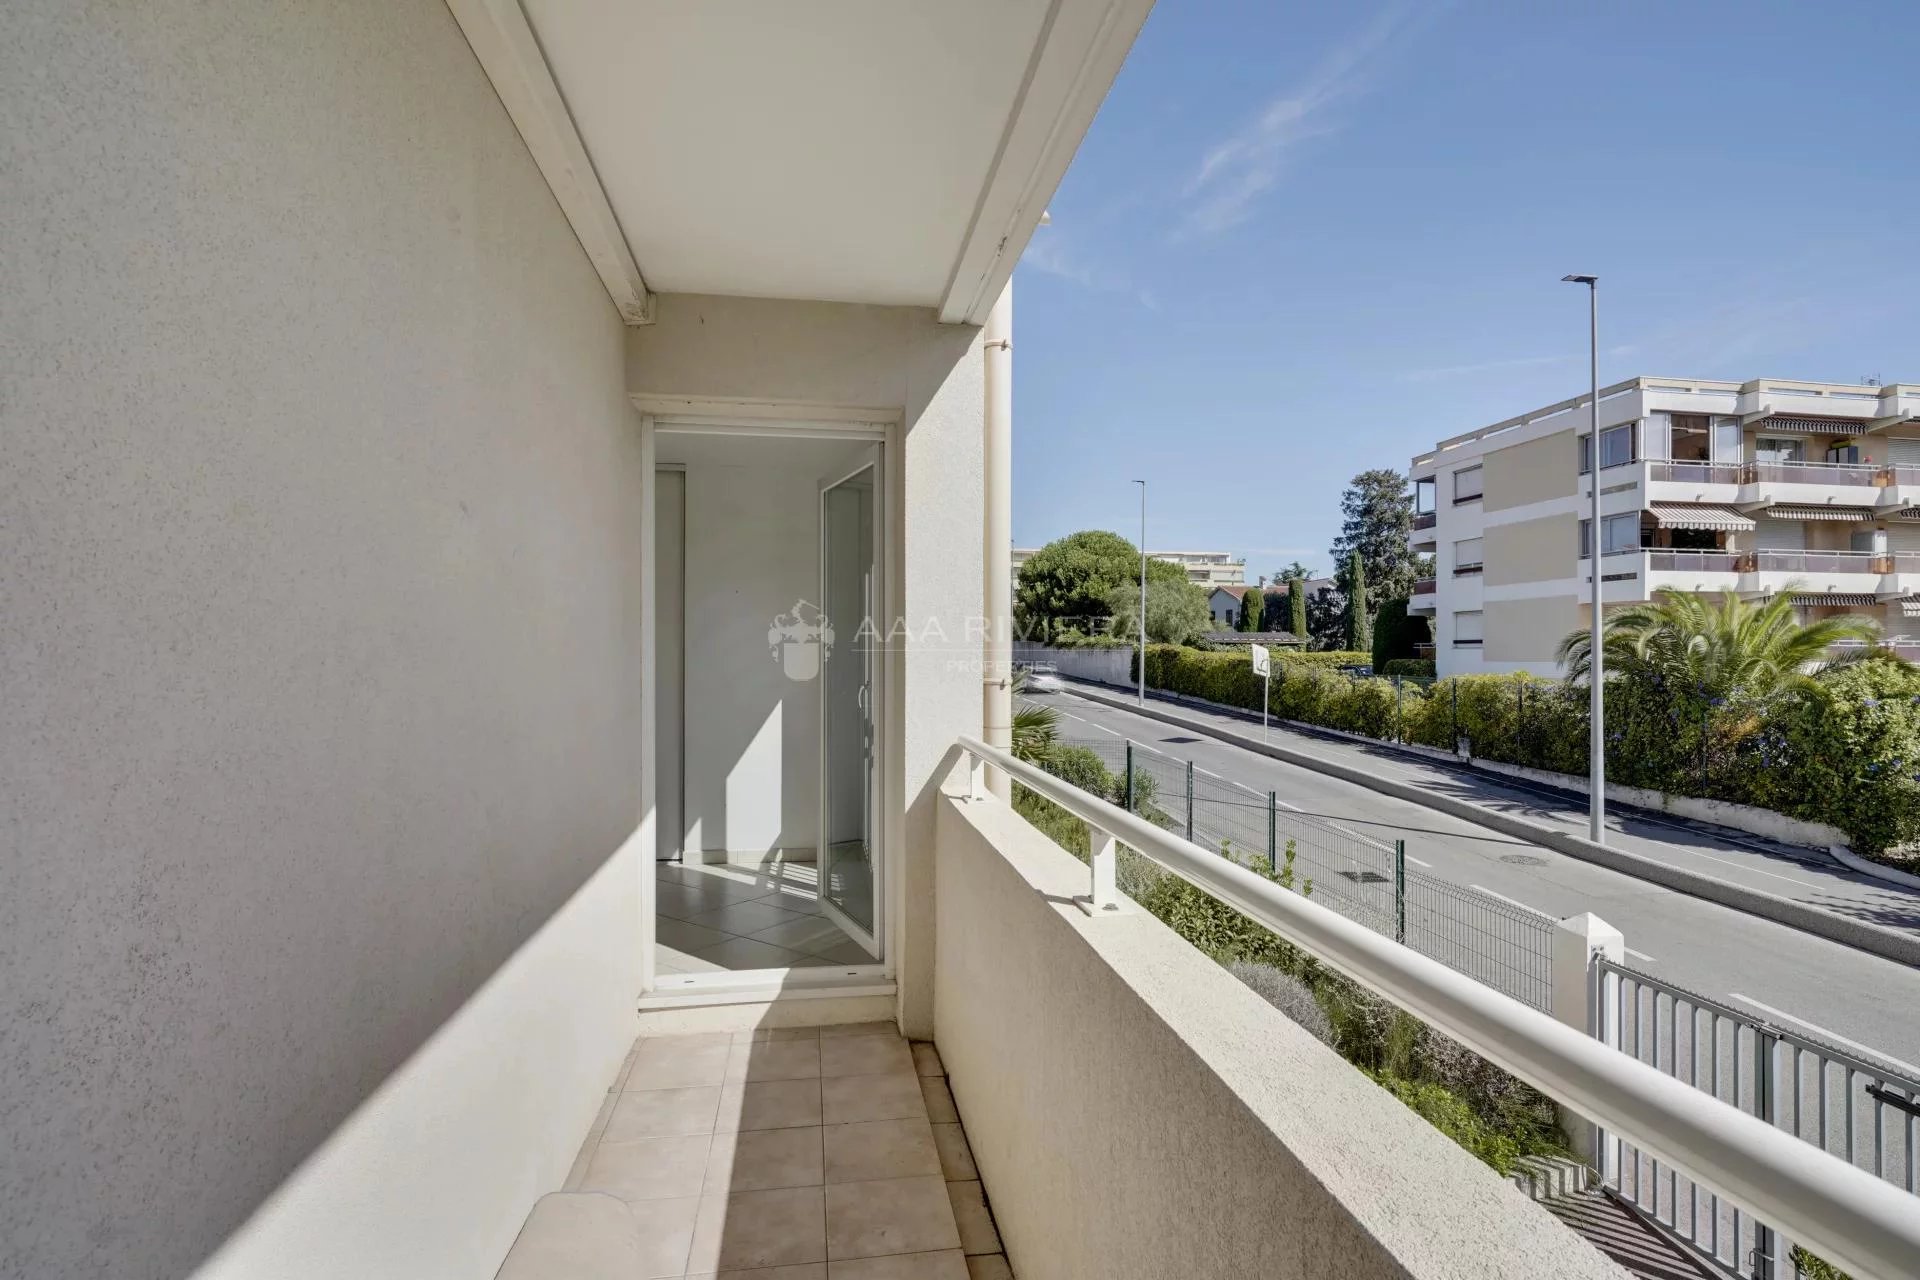 SOLE AGENT  - UNDER OFFER 2 bedroom apt in residence with pool right on the beaches of Juan les Pins